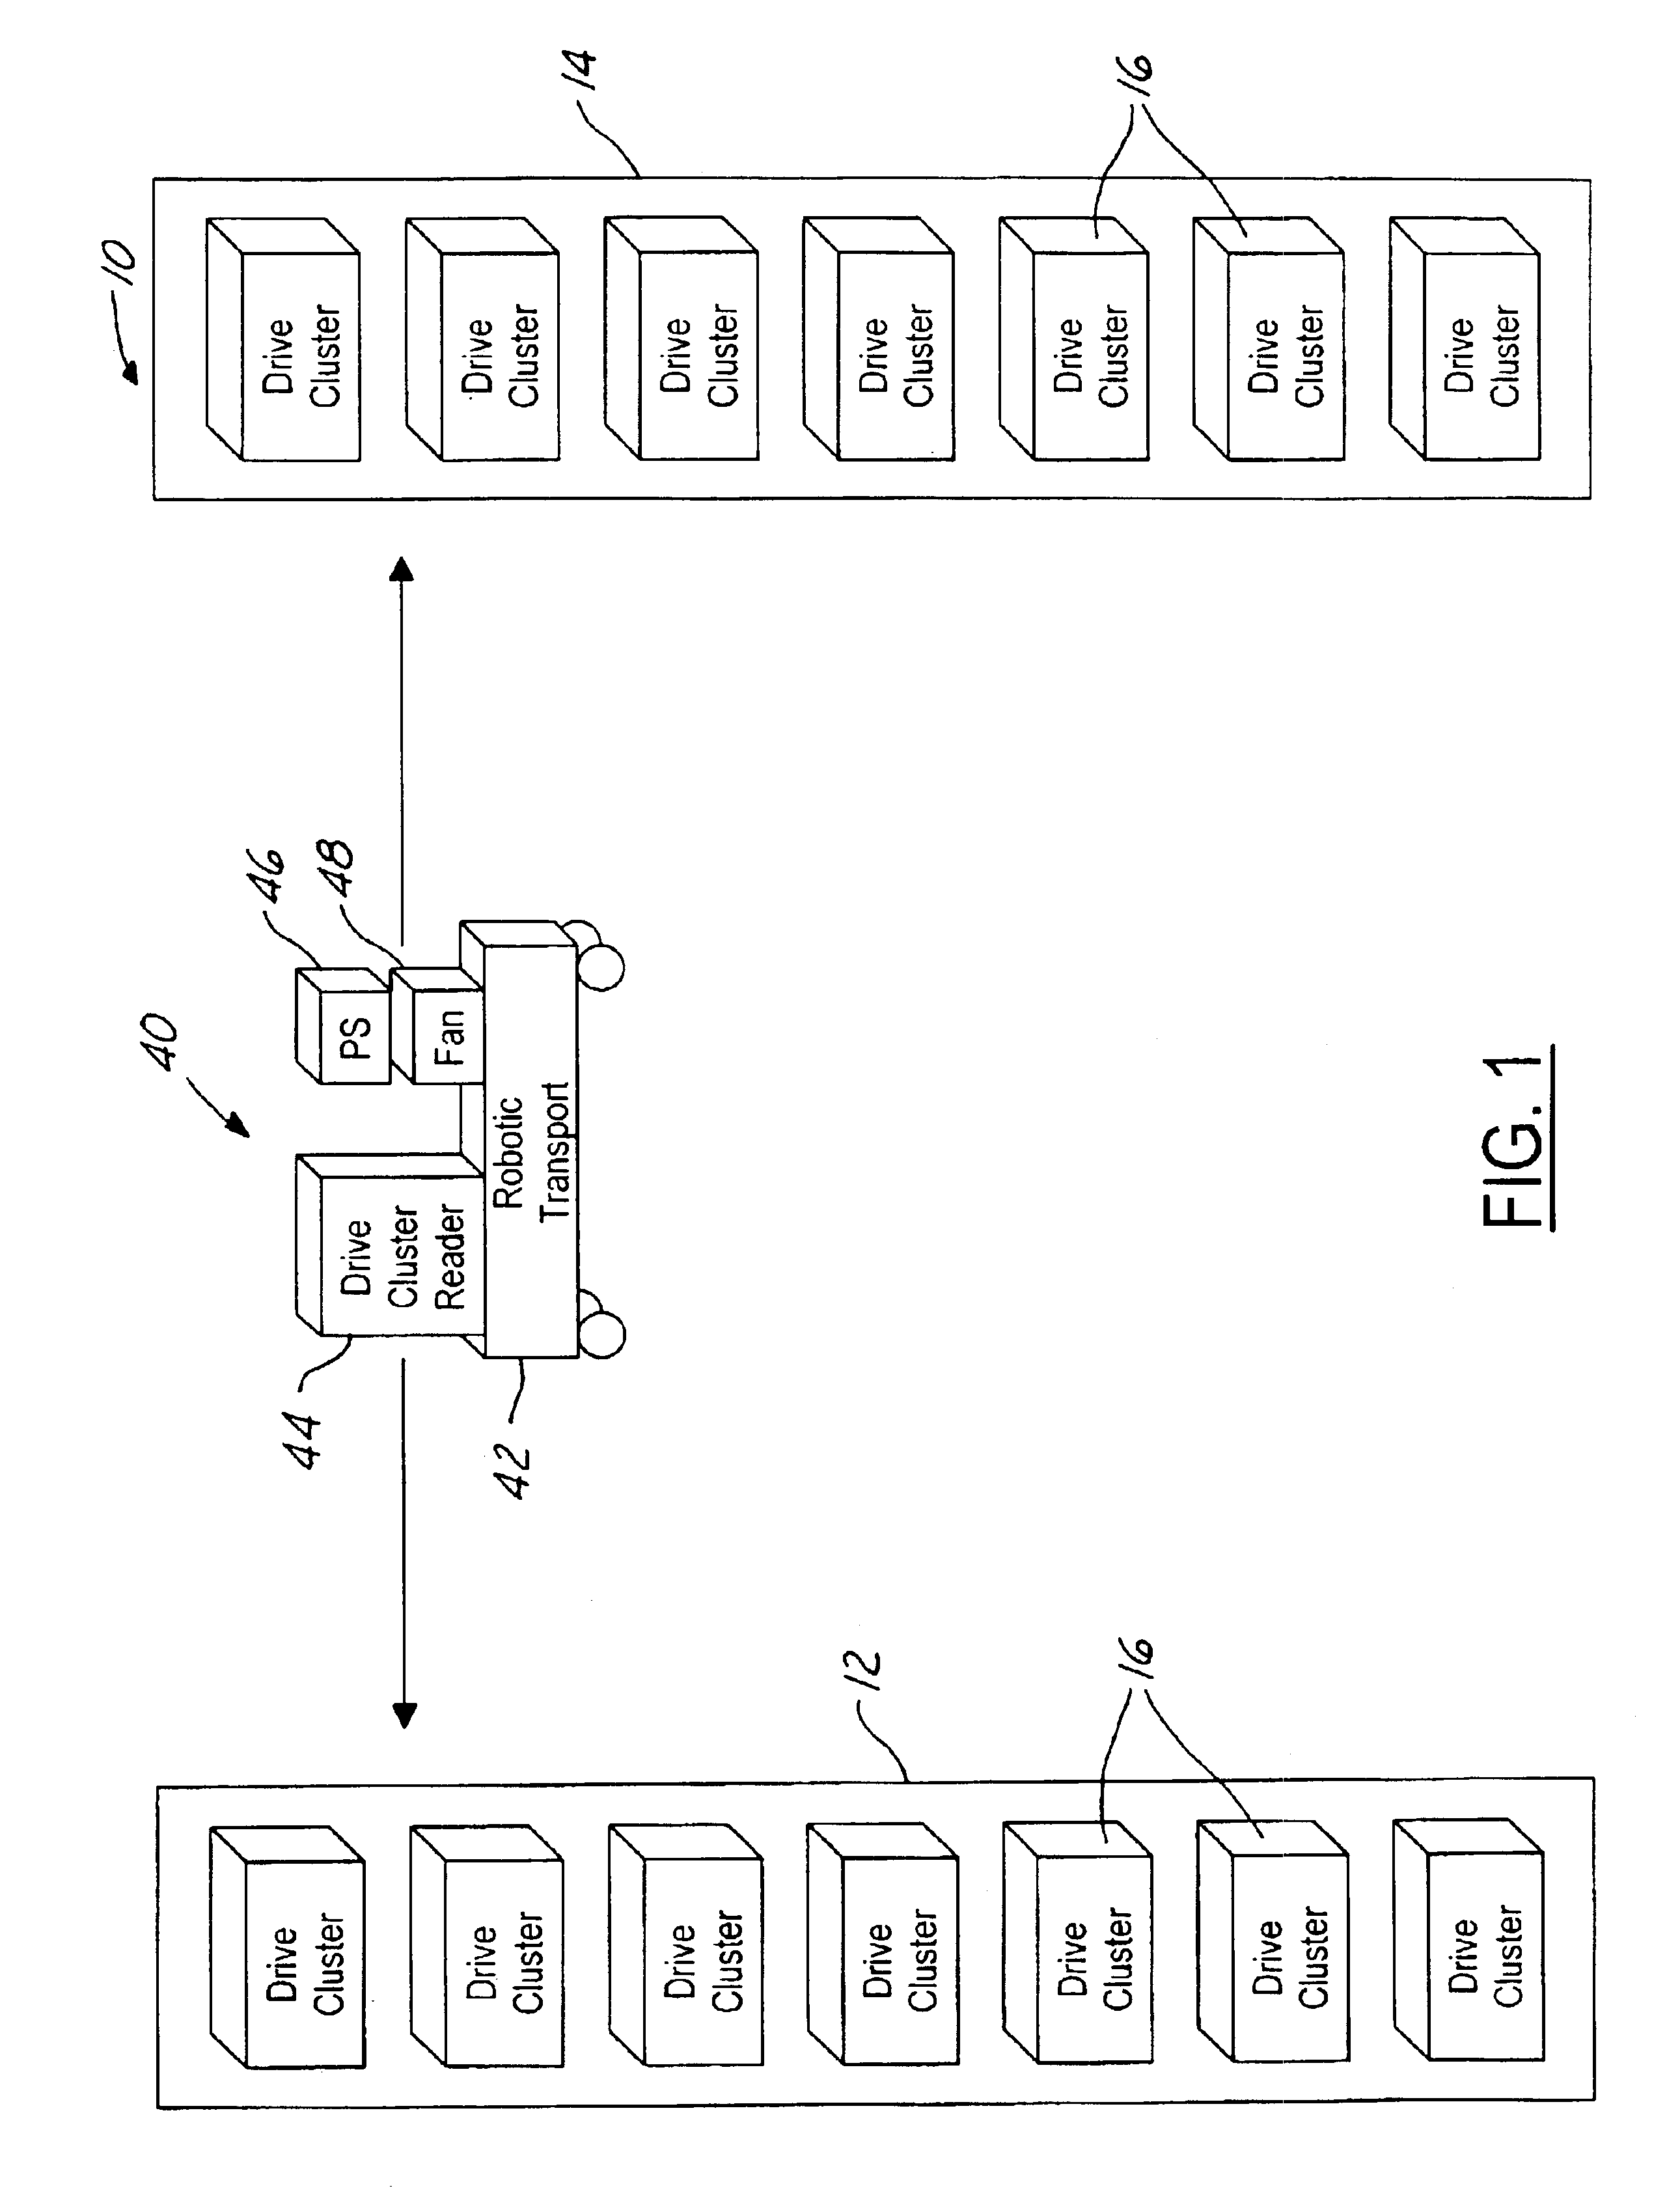 Data library system having movable robotic librarian operable for accessing statically mounted drives